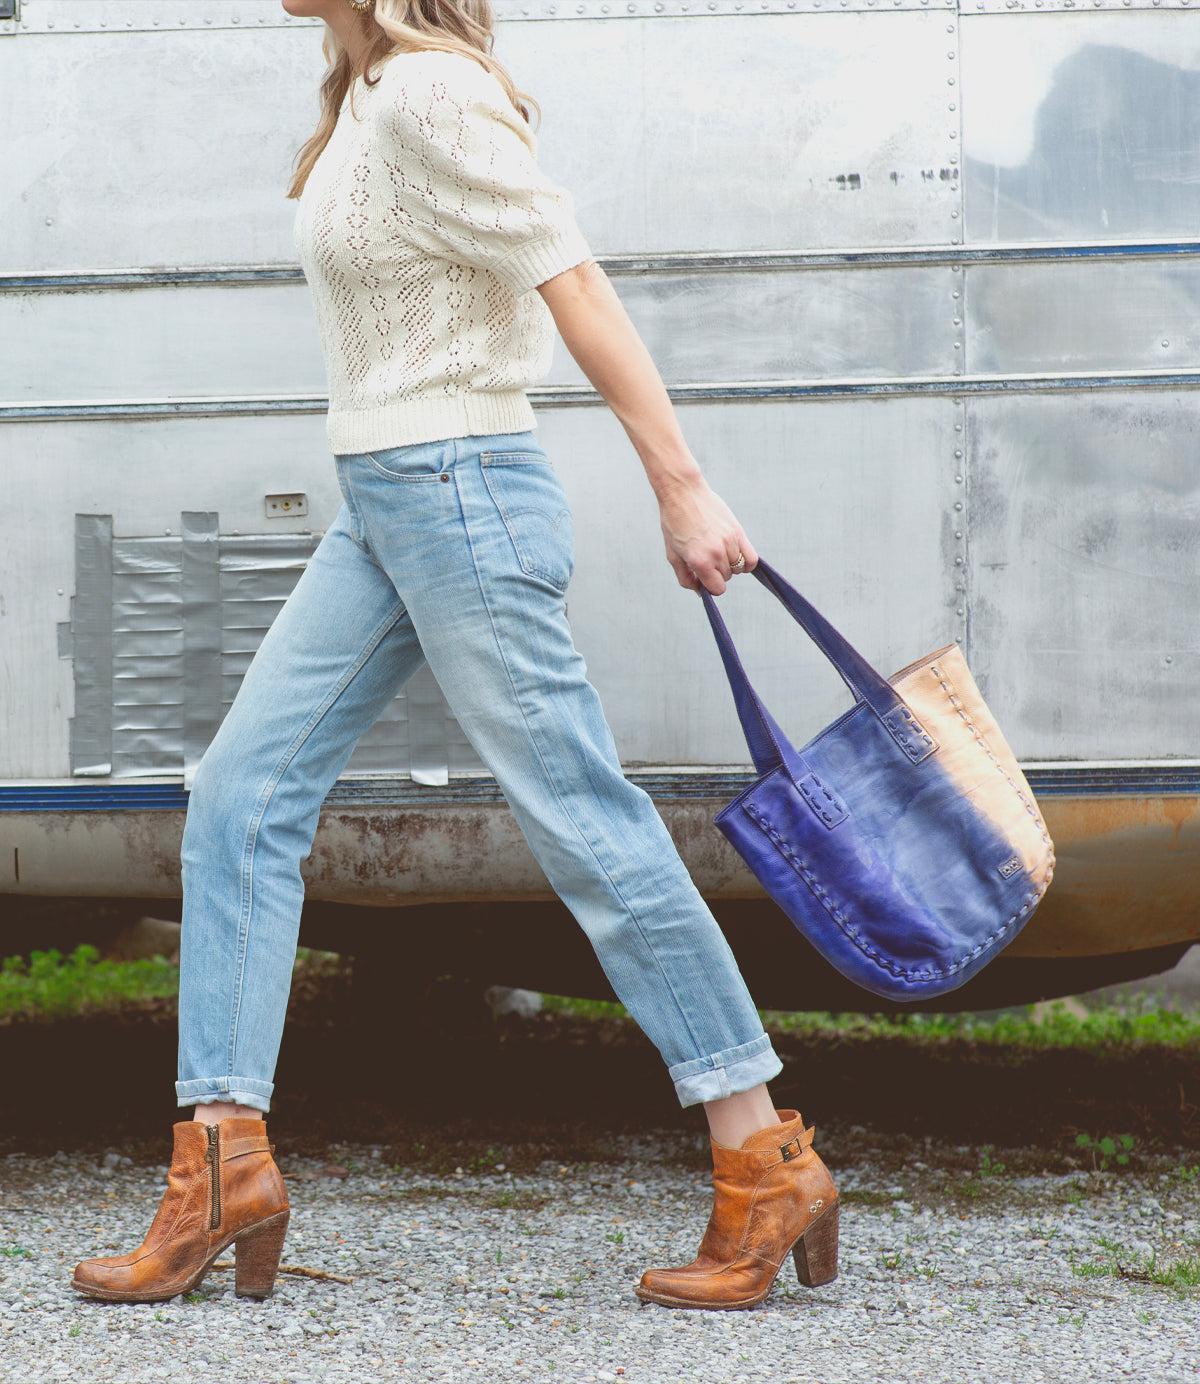 A woman walking with a blue Bed Stu Stevie modern tote in front of a trailer.